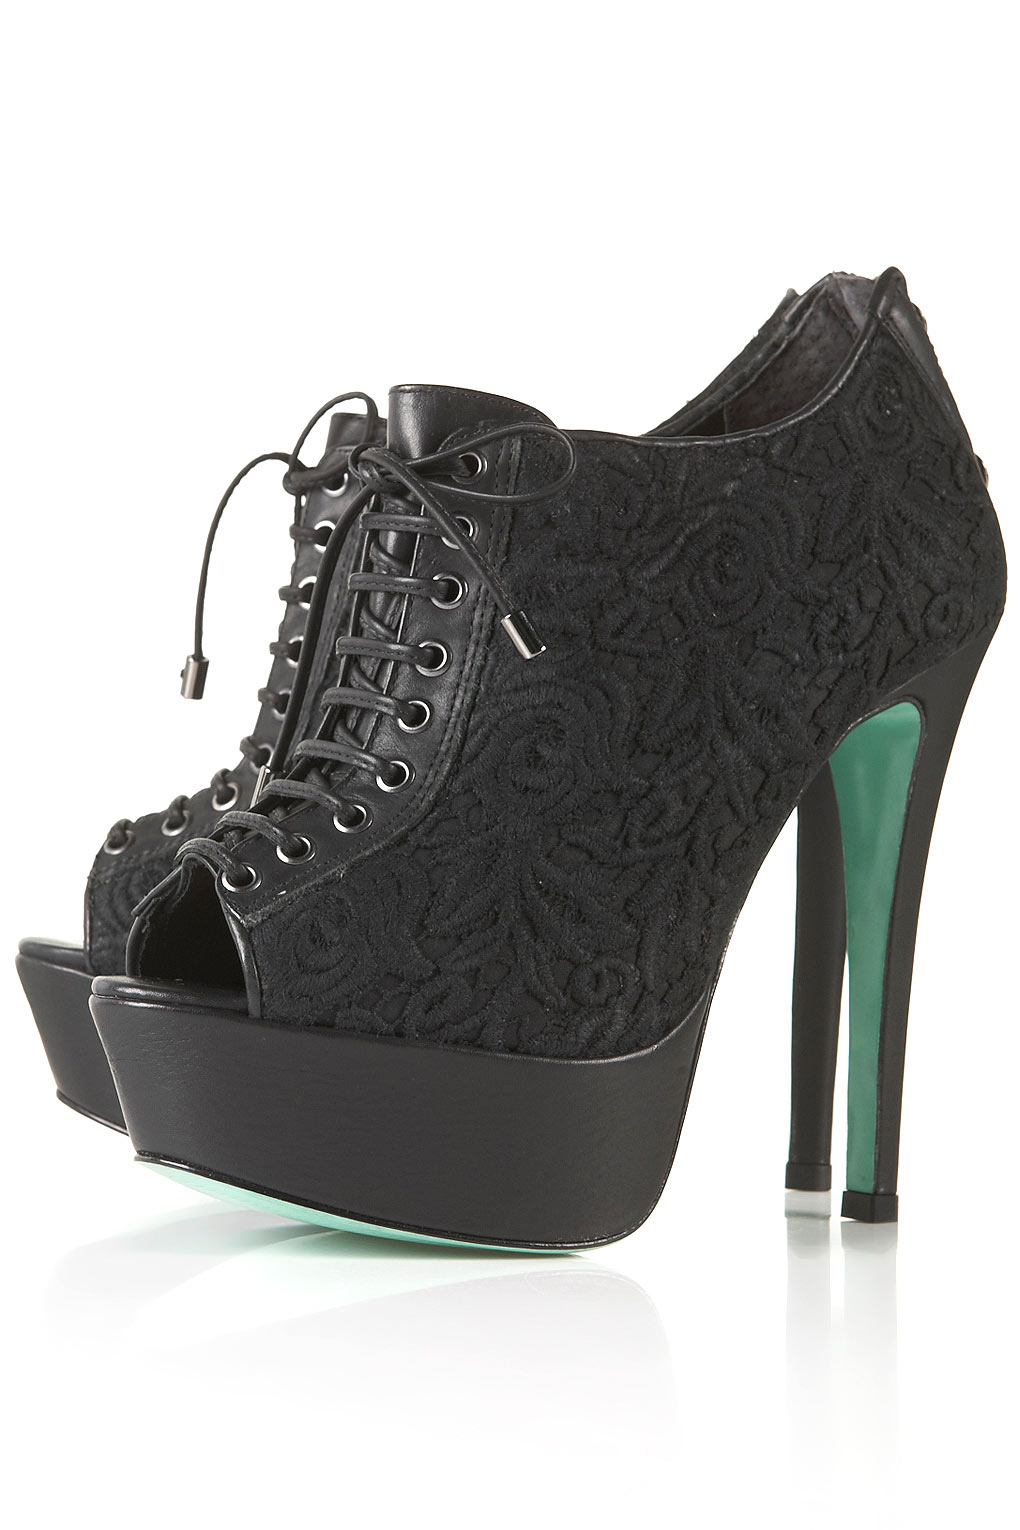 Chloe Green for Topshop Shoes |Mirror on the Wall......